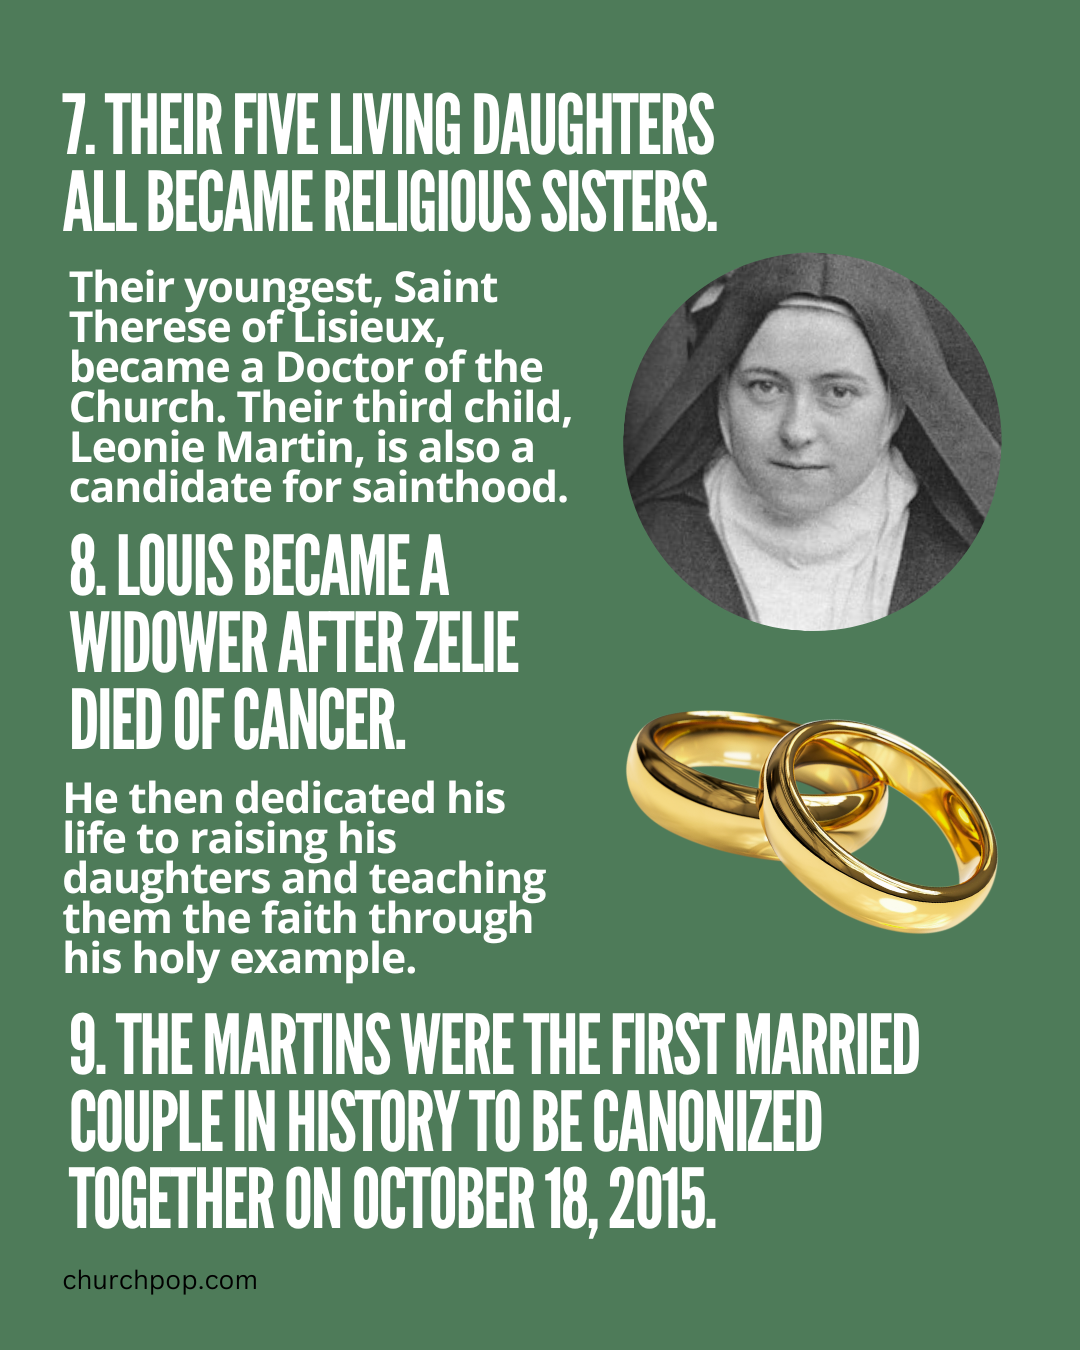 When were Louis and Zelie Martin canonized?